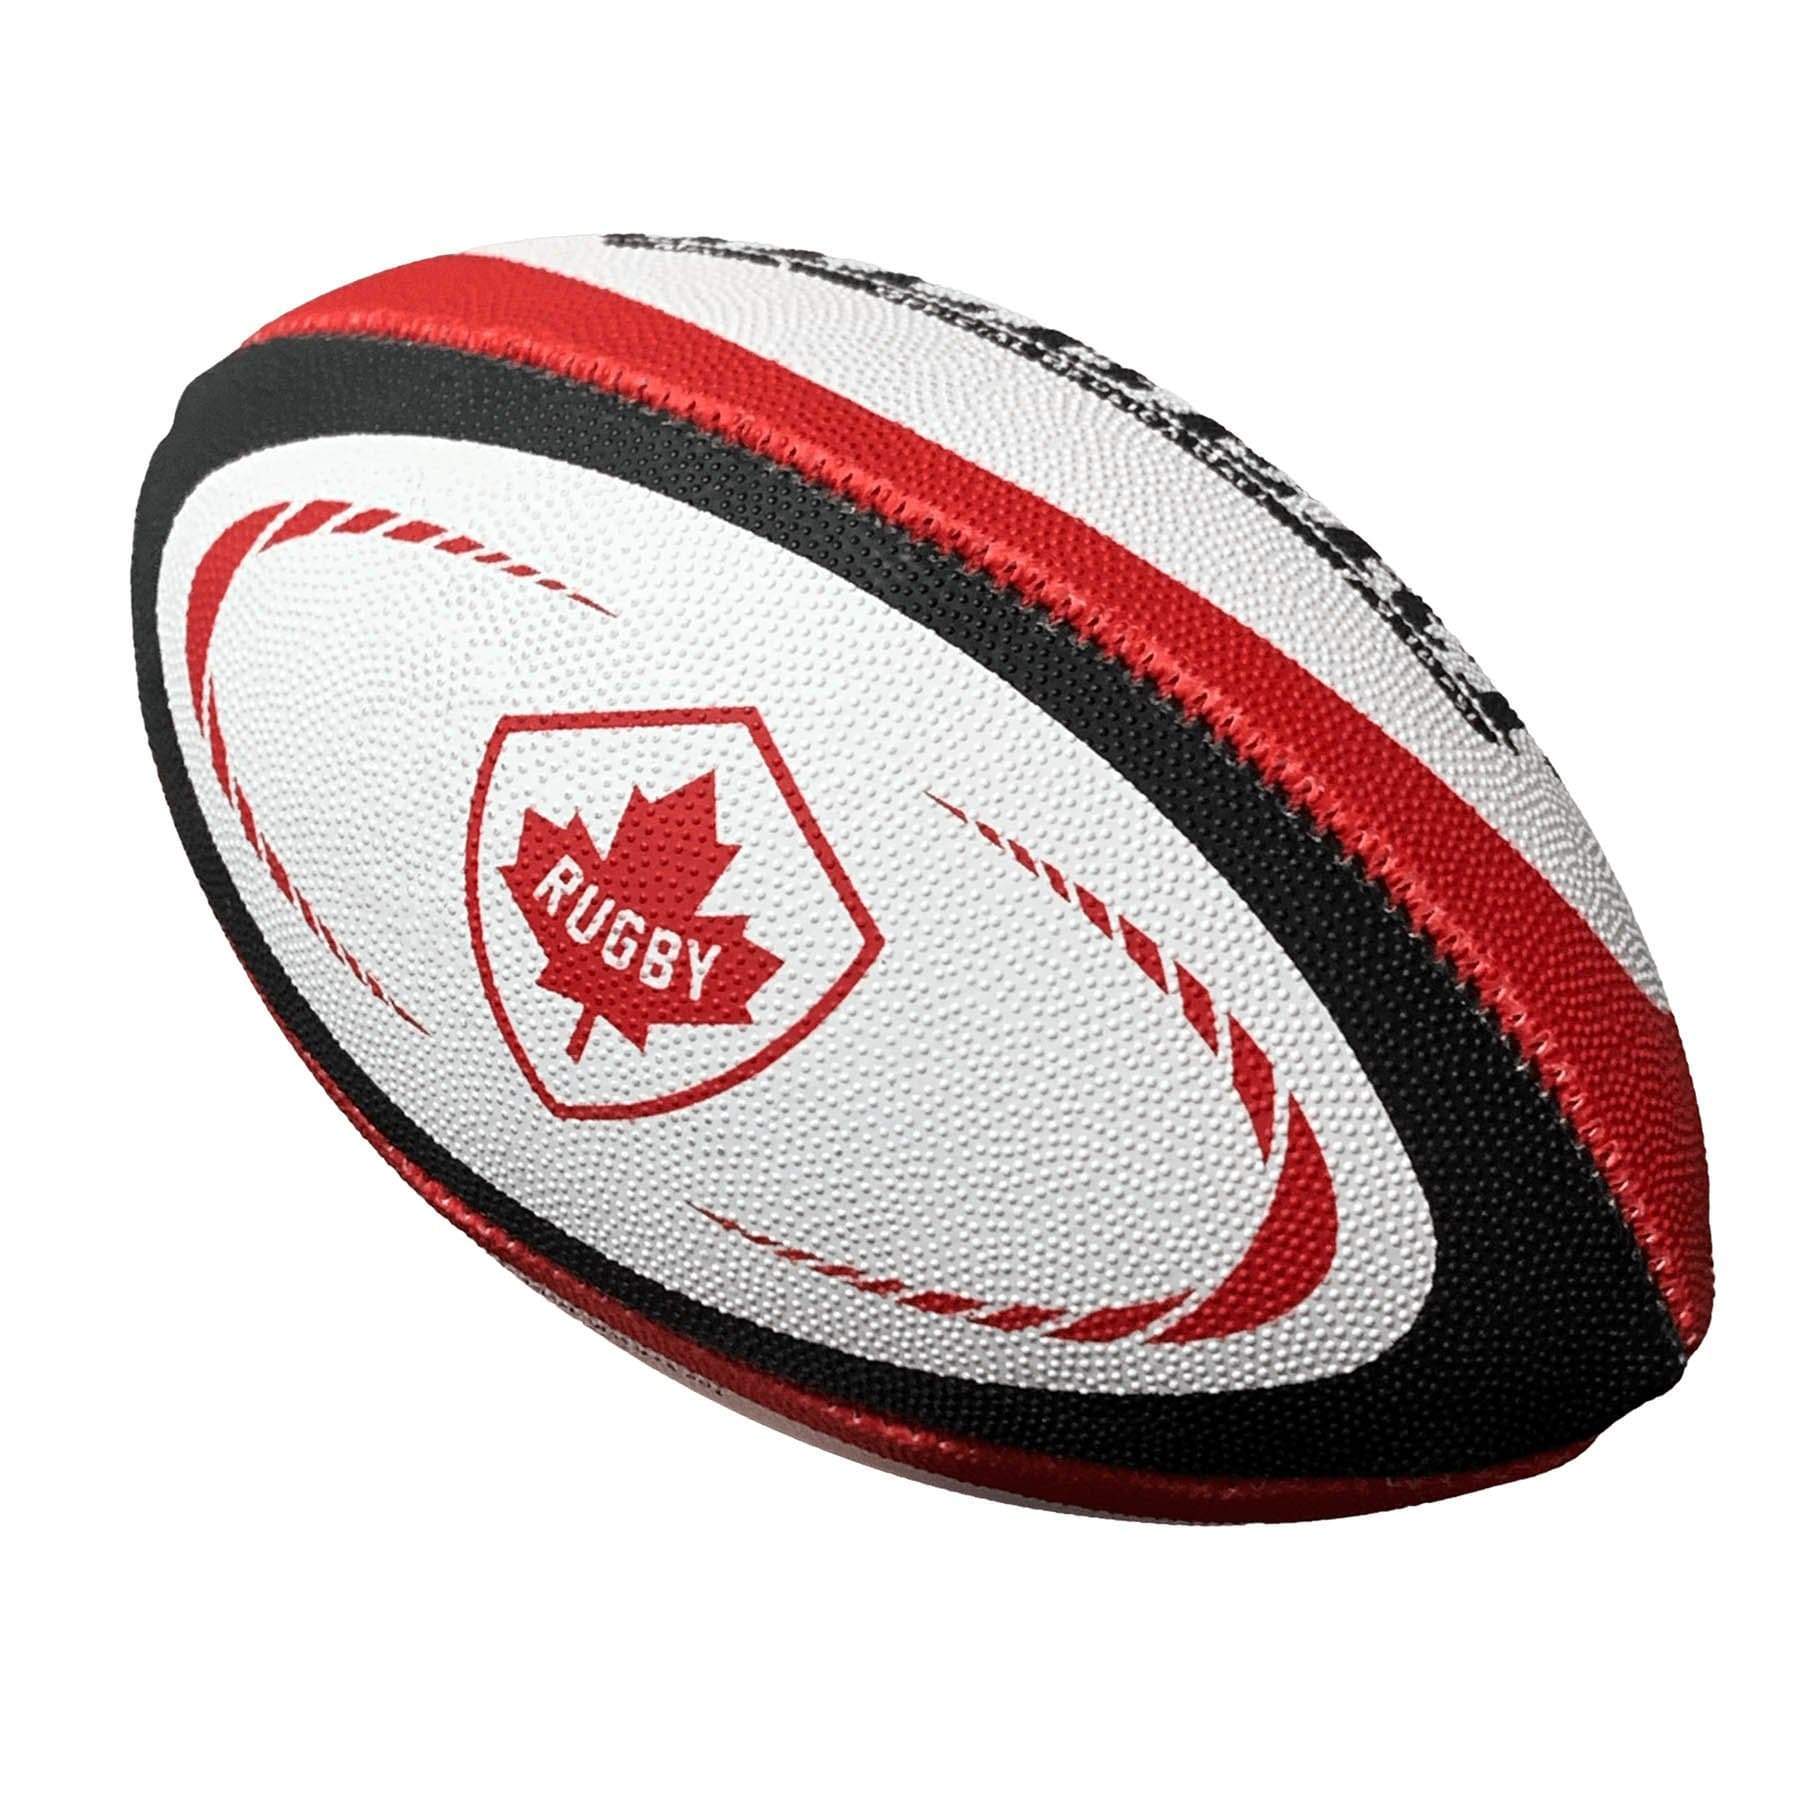 Rugby Imports Gilbert Canada Mini Rugby Ball